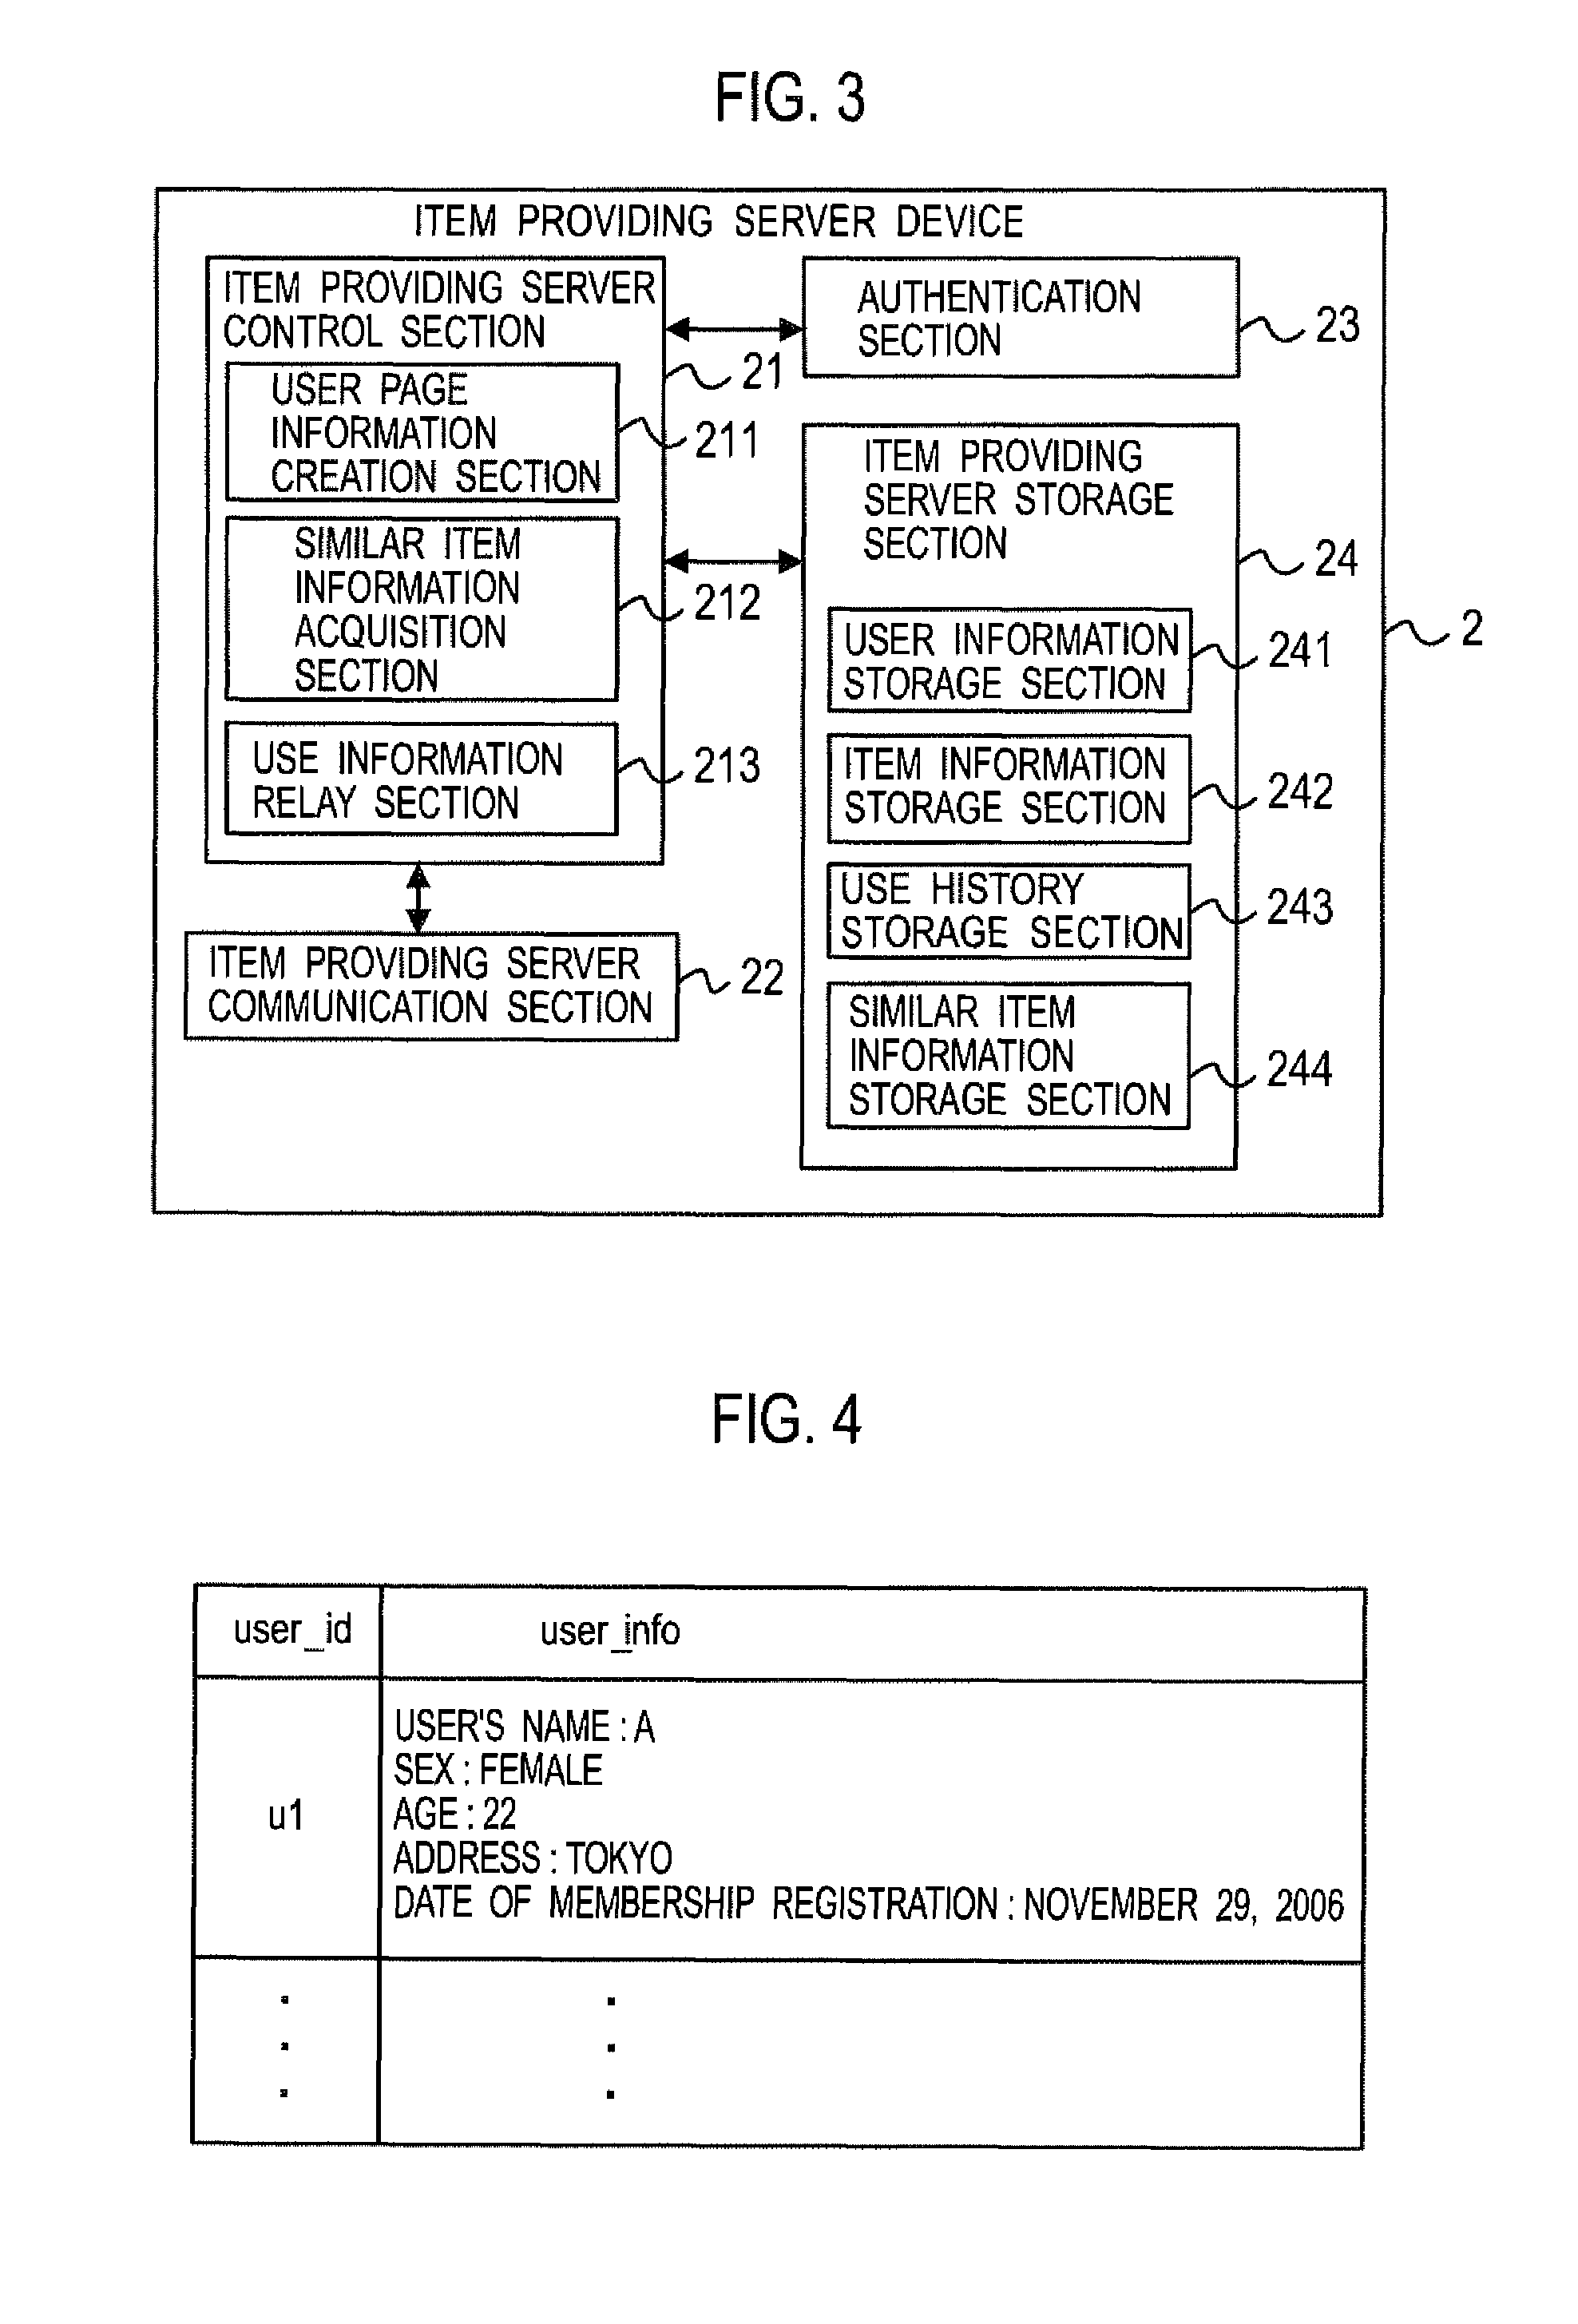 Information processing using a point system based on usage history and associated data creation